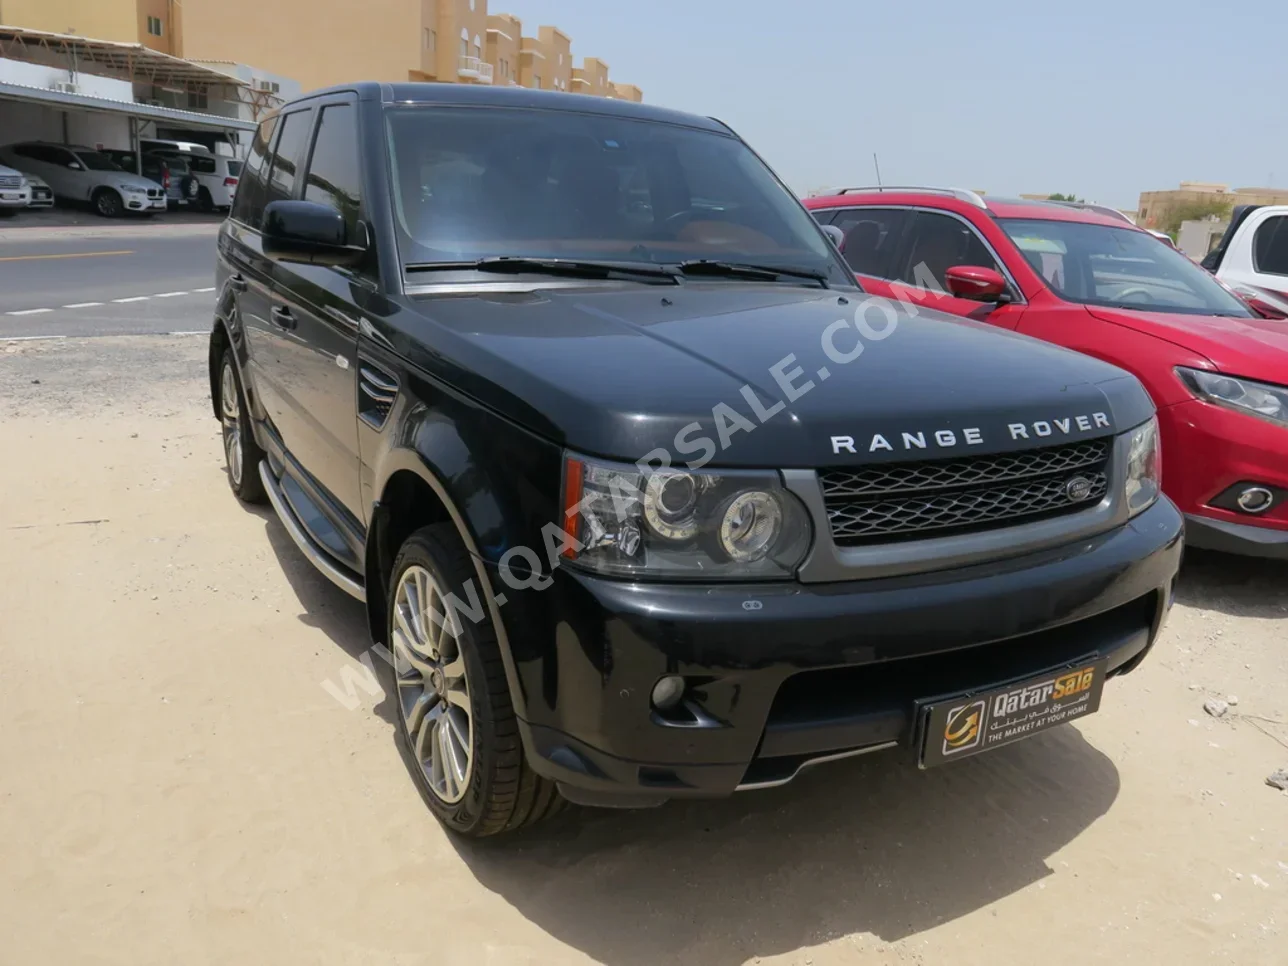 Land Rover  Range Rover  Sport Super charged  2010  Automatic  117,000 Km  8 Cylinder  Four Wheel Drive (4WD)  SUV  Black